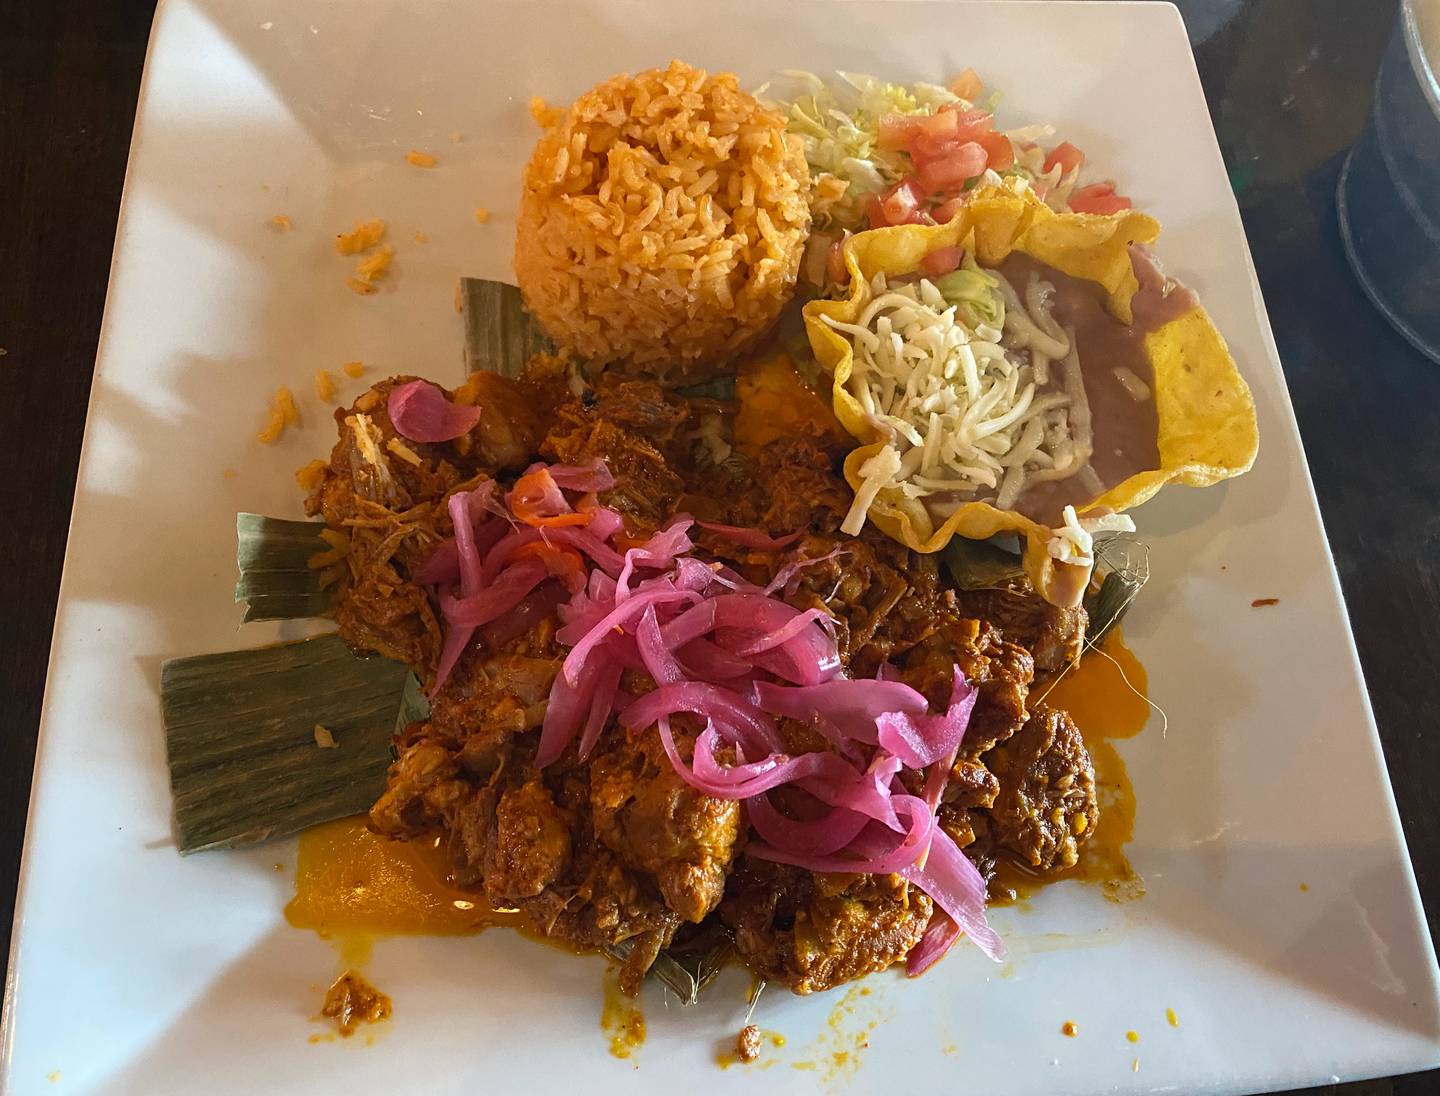 I ordered cochinita pibil, Yucatan-style pulled pork topped with habanero purple onion, served with rice and beans, at Antigua Mexican Brunch and Grill in Algonquin.